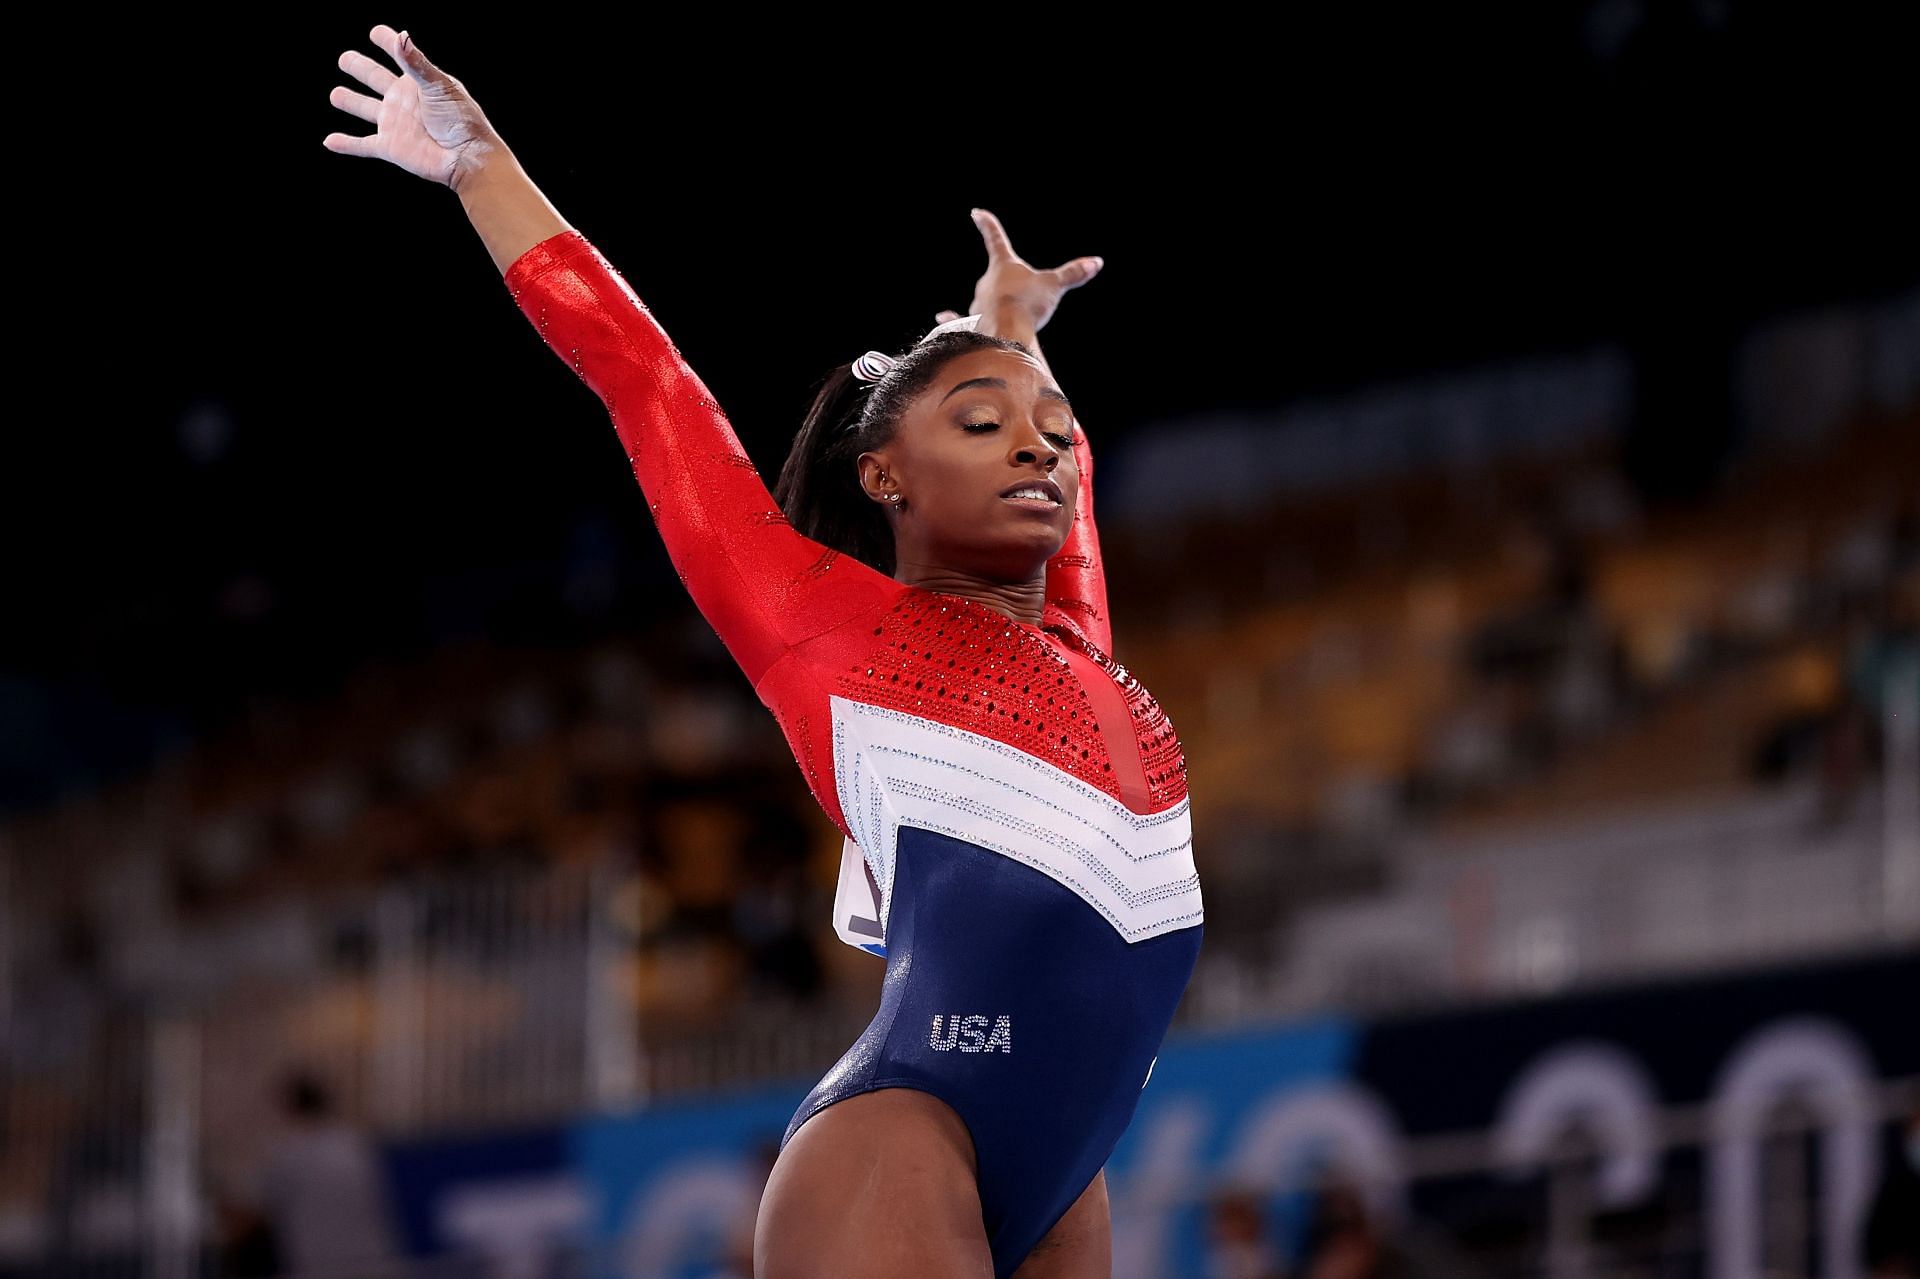 Simone Biles of Team United States competes on vault during the Women&#039;s Team Final on day four of the Tokyo 2020 Olympic Games at Ariake Gymnastics Centre on July 27, 2021 in Tokyo, Japan. (Photo by Laurence Griffiths/Getty Images)